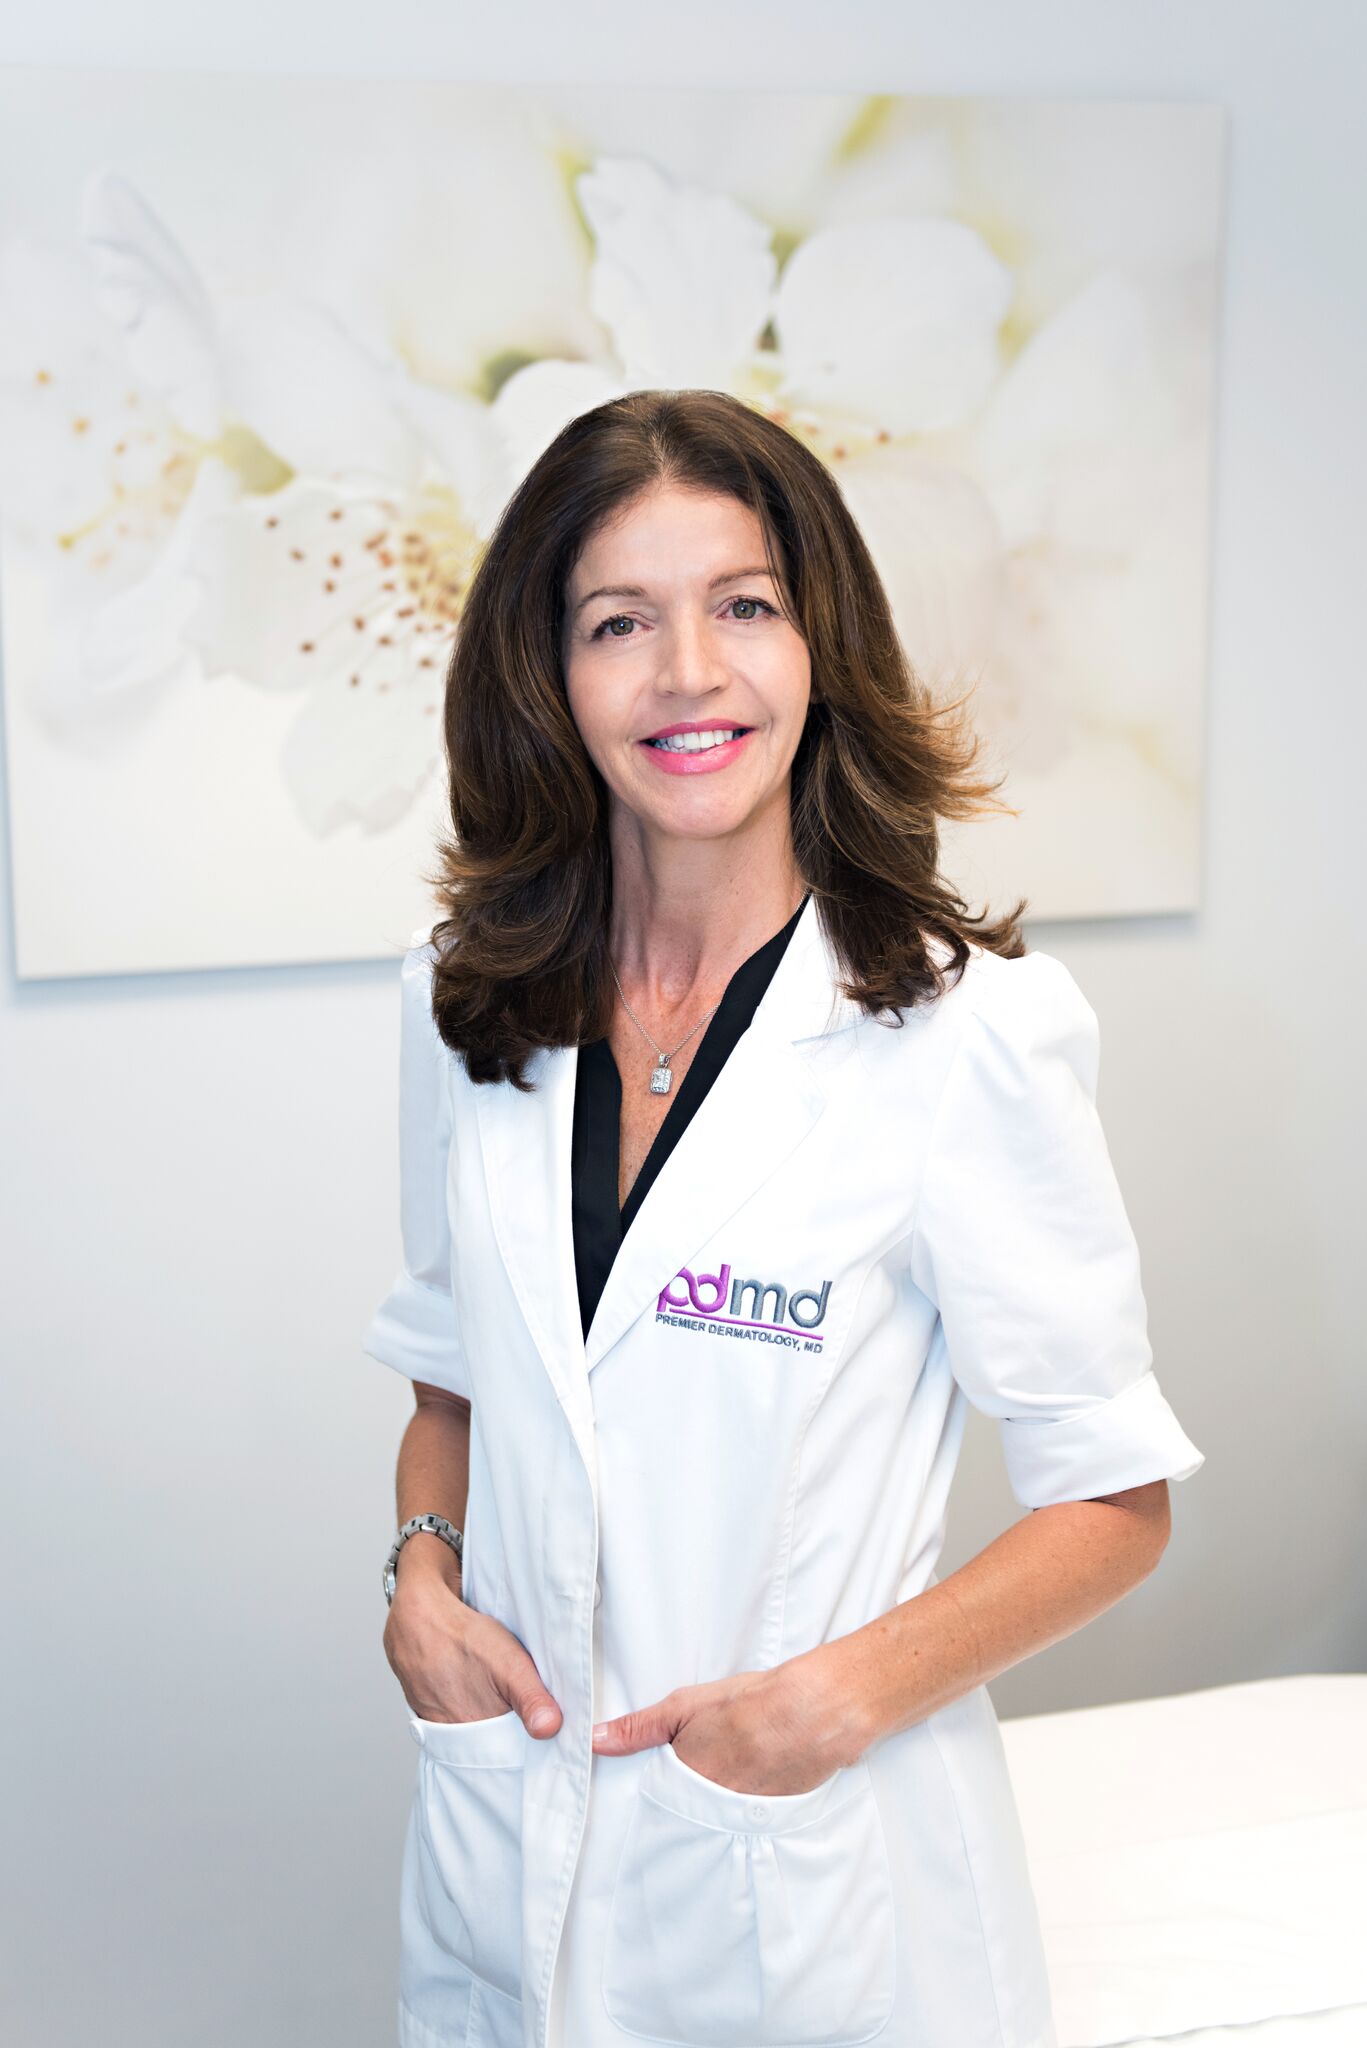 Audrey Thorne, licensed Aesthetician